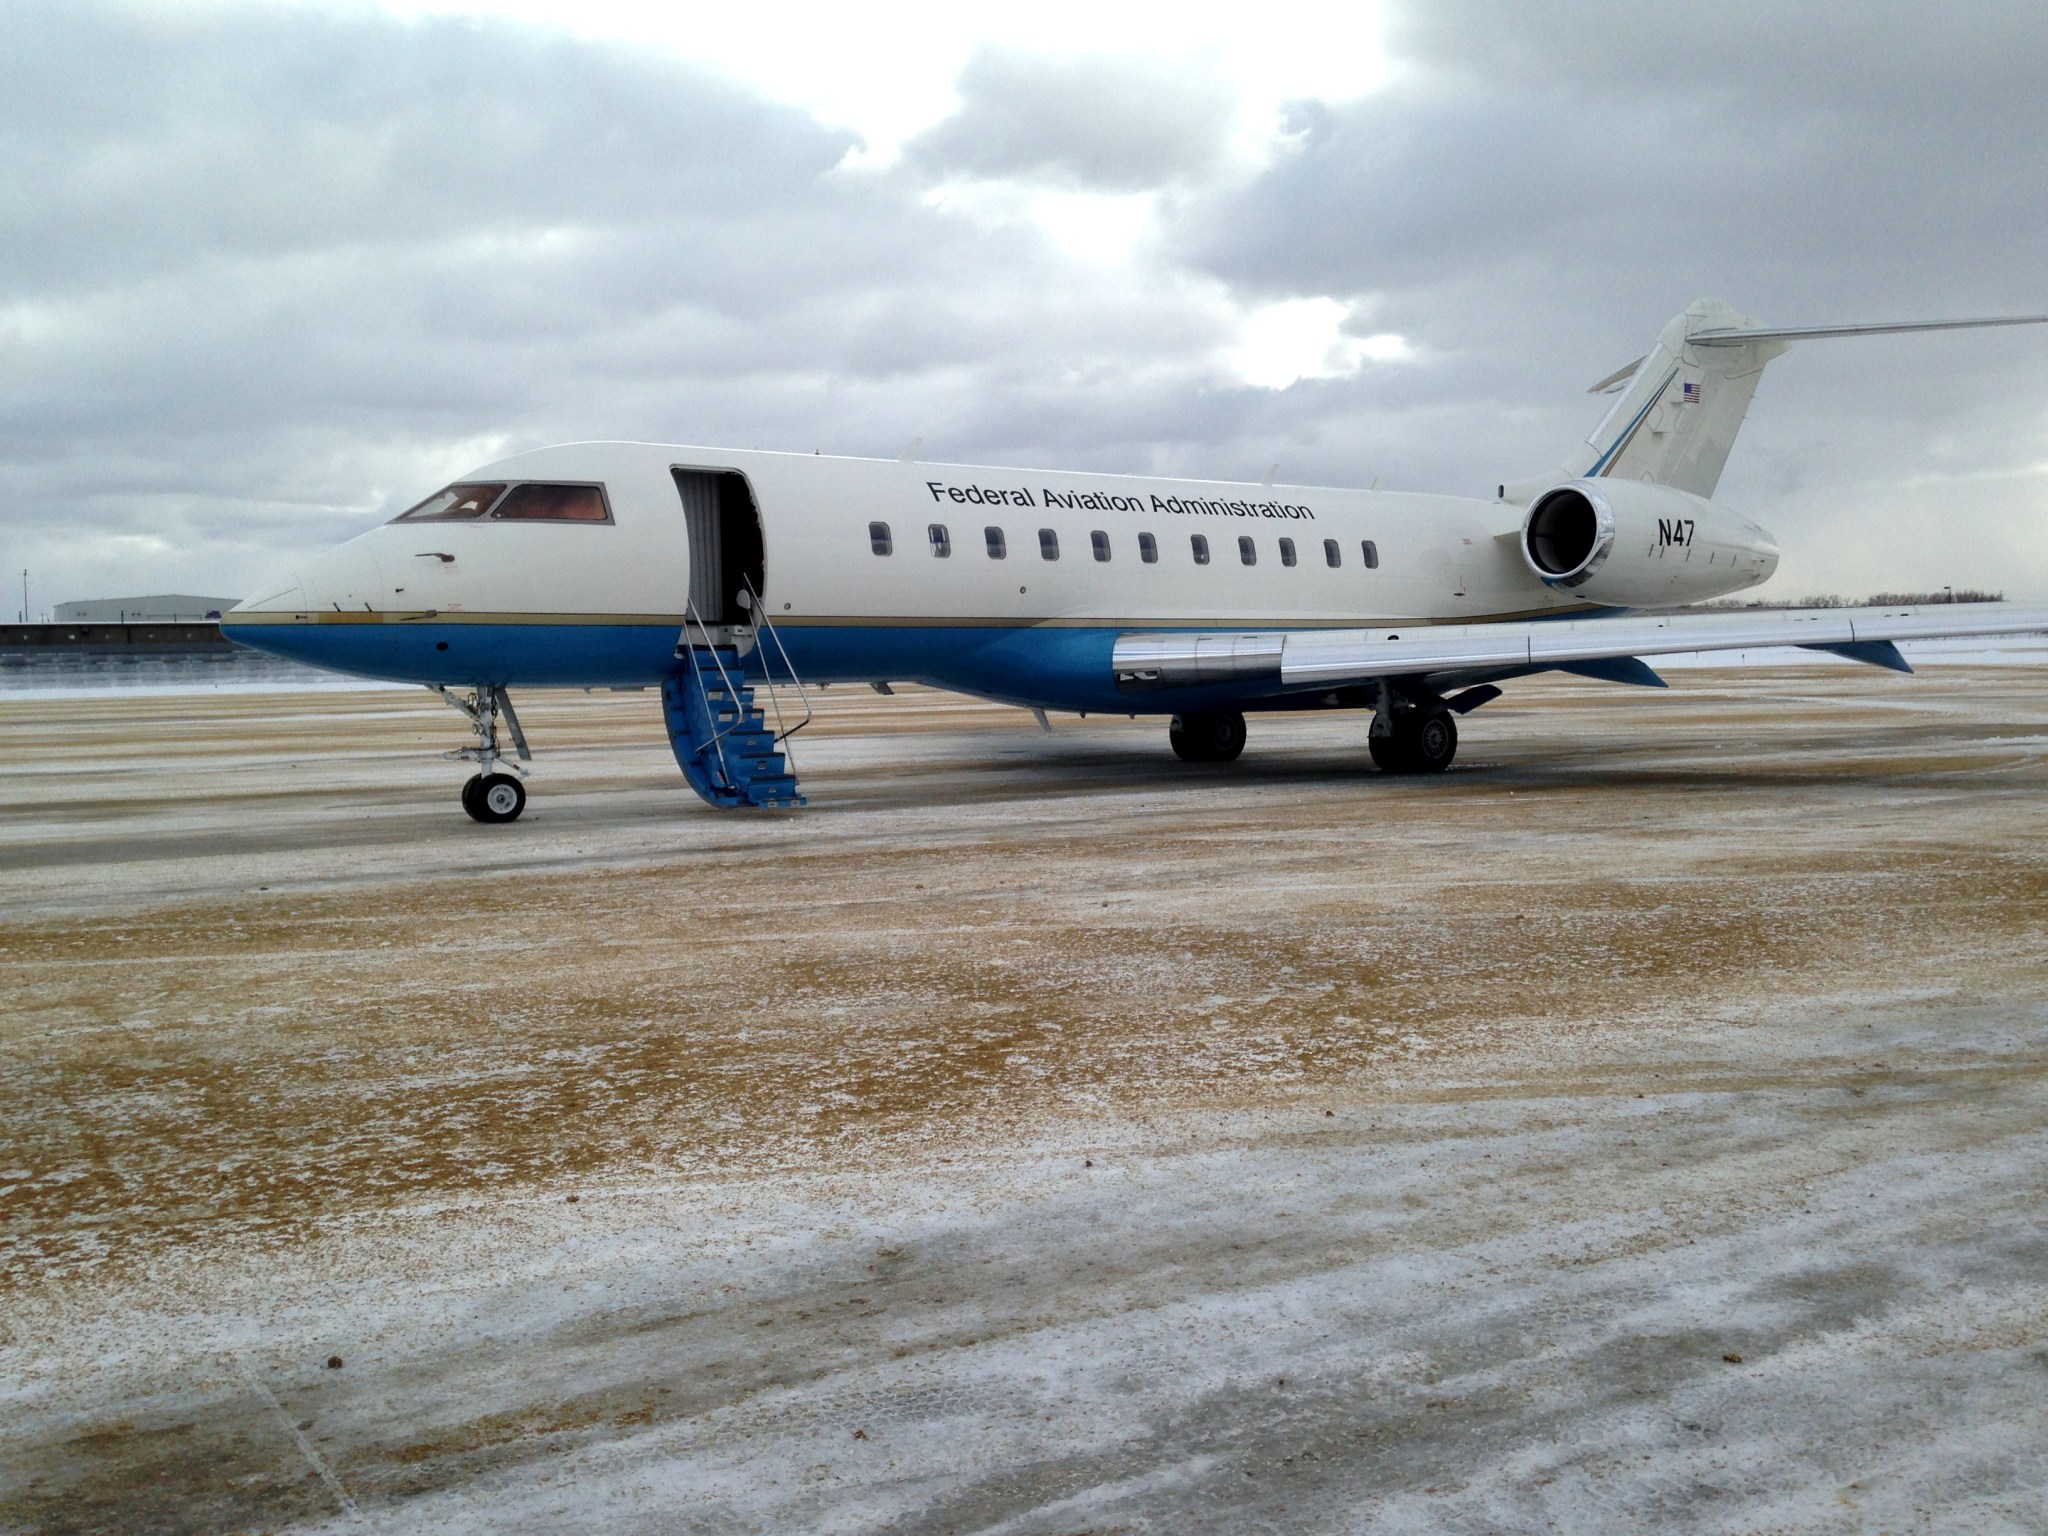 FAA Bombardier Global 5000 test aircraft used in the wireless communication system demonstration